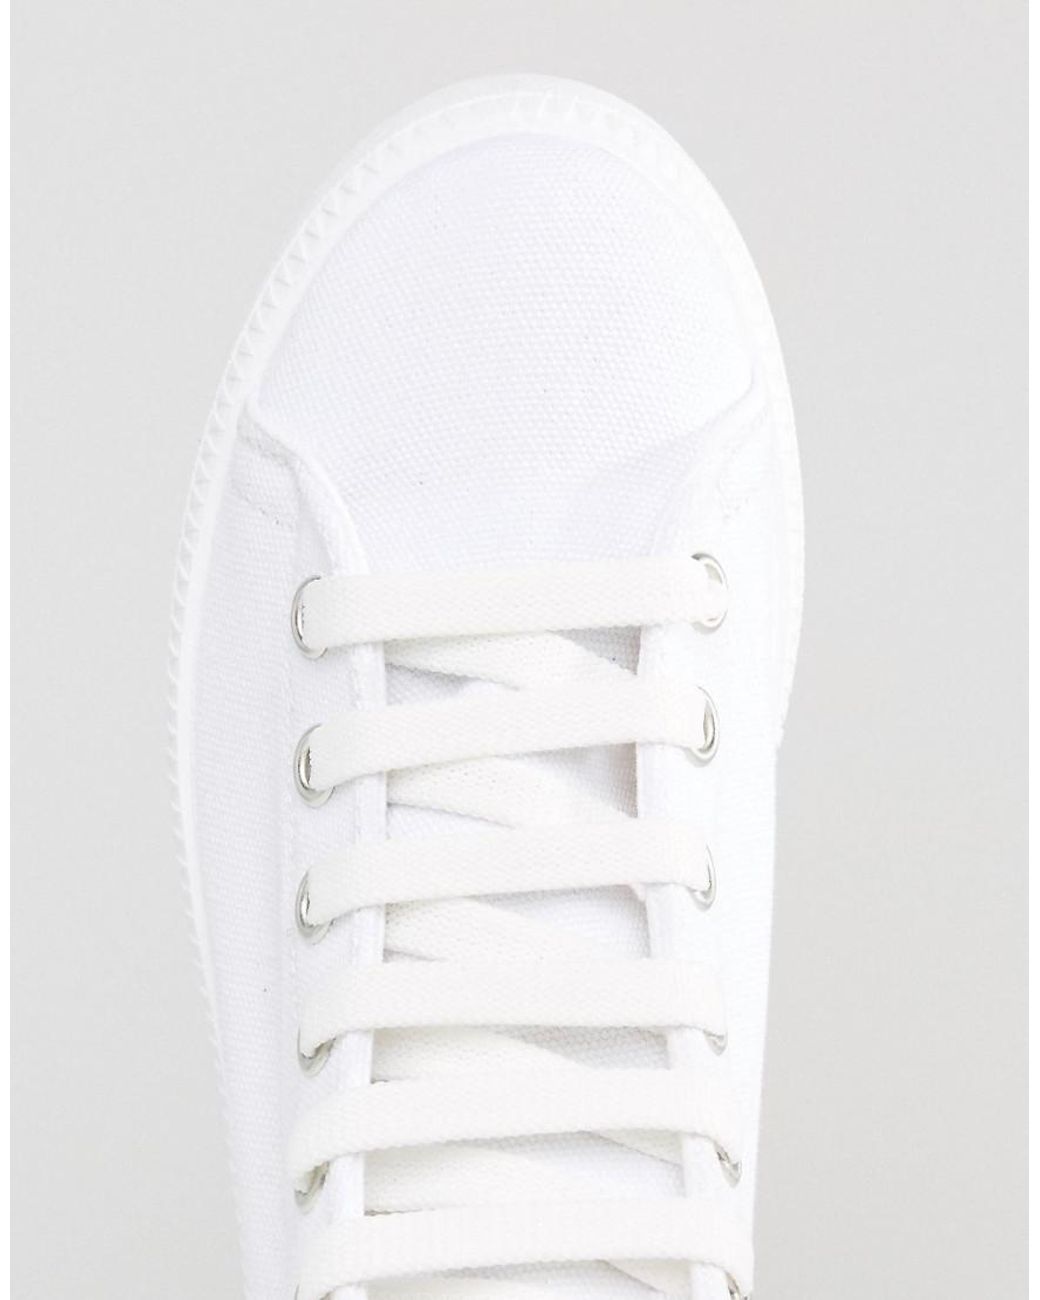 adidas Originals International Womens Day Superstar sneakers in white and  lilac | ASOS